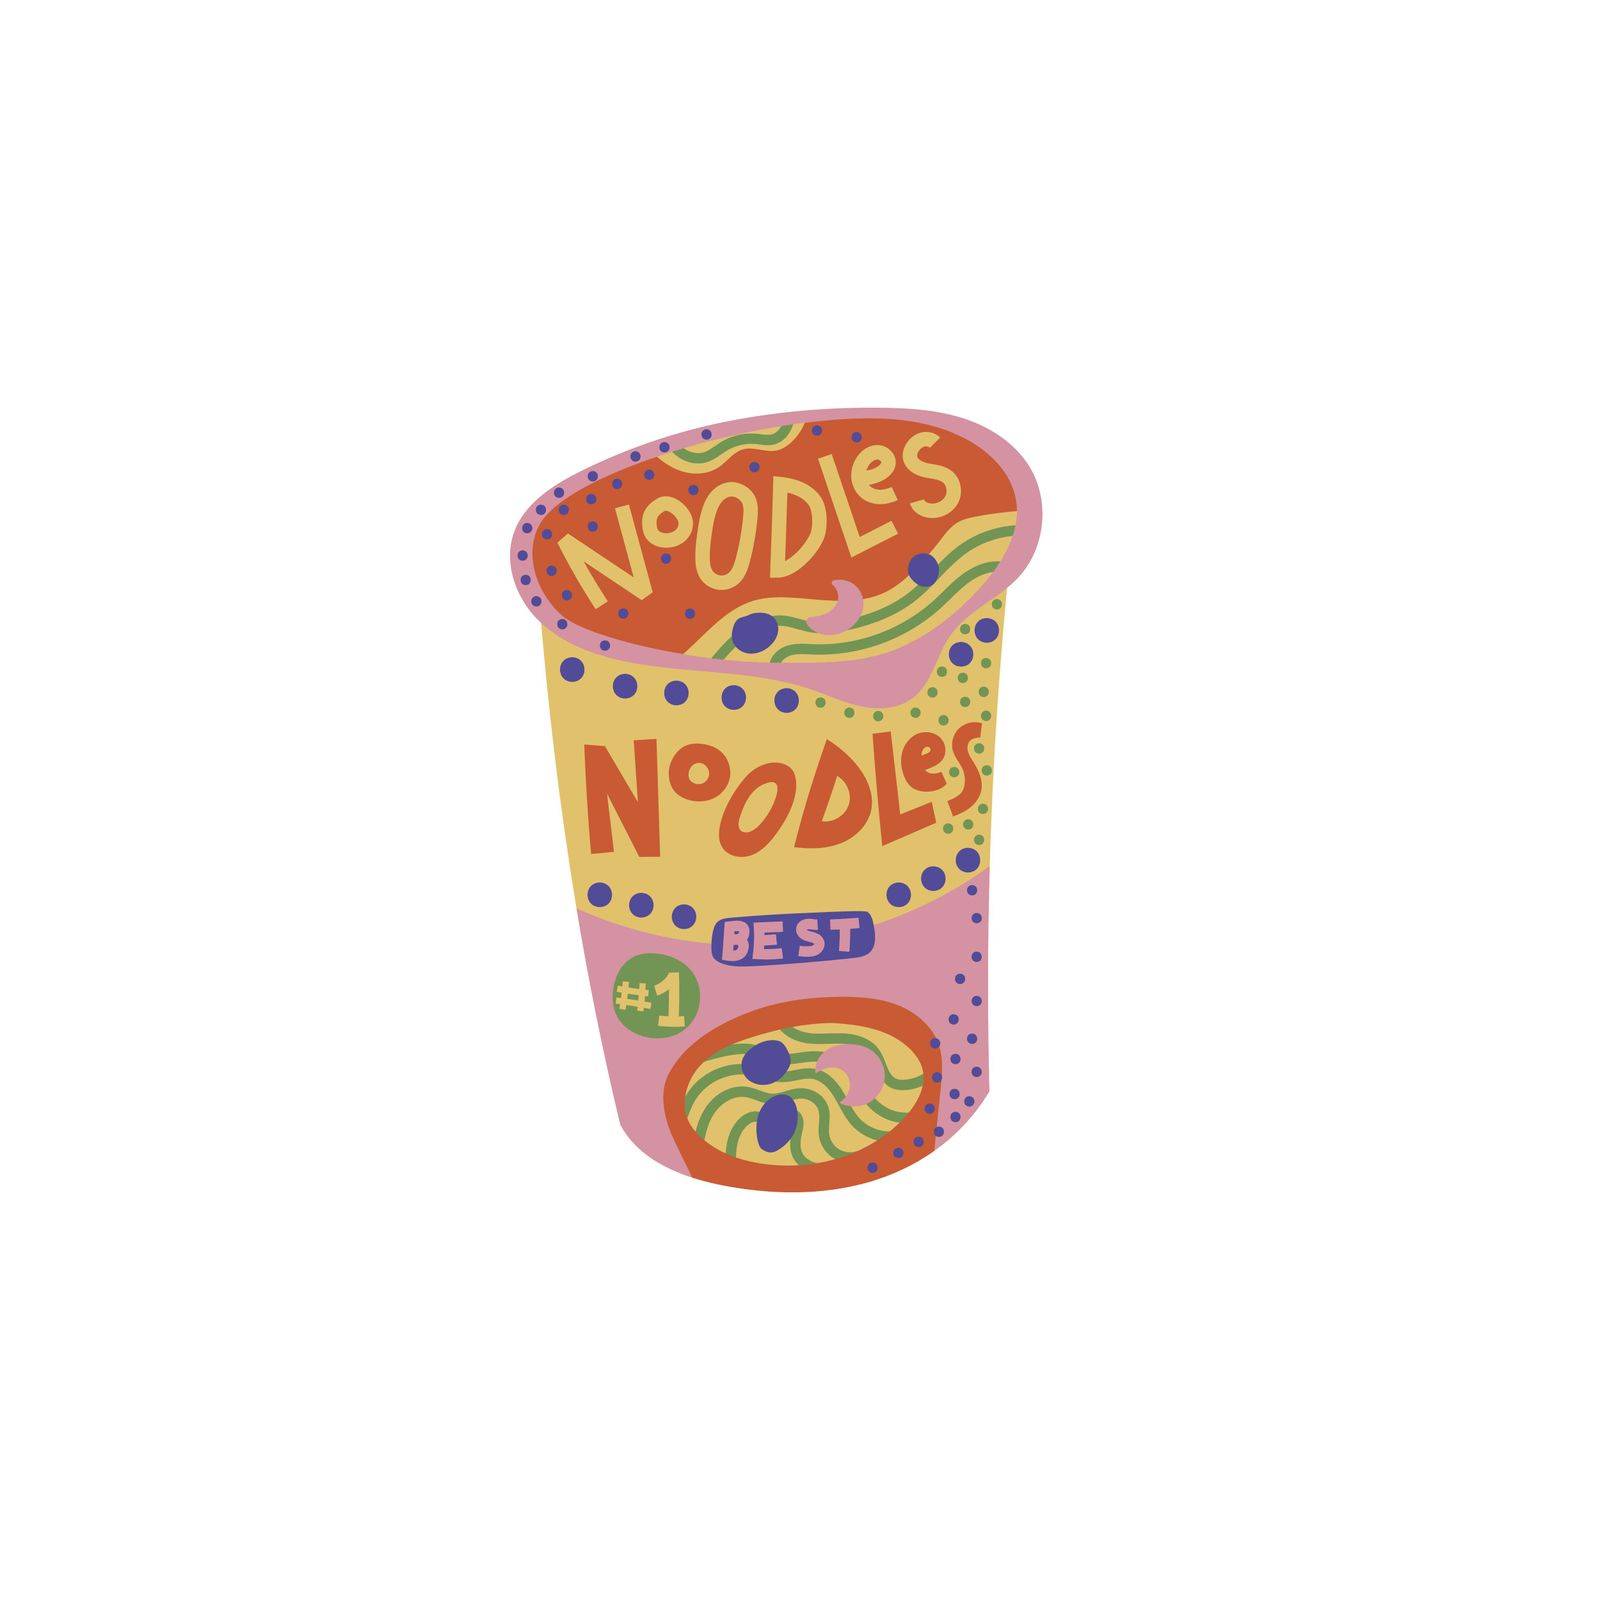 Instant noodles in a cup illustration by chickfishdoodles